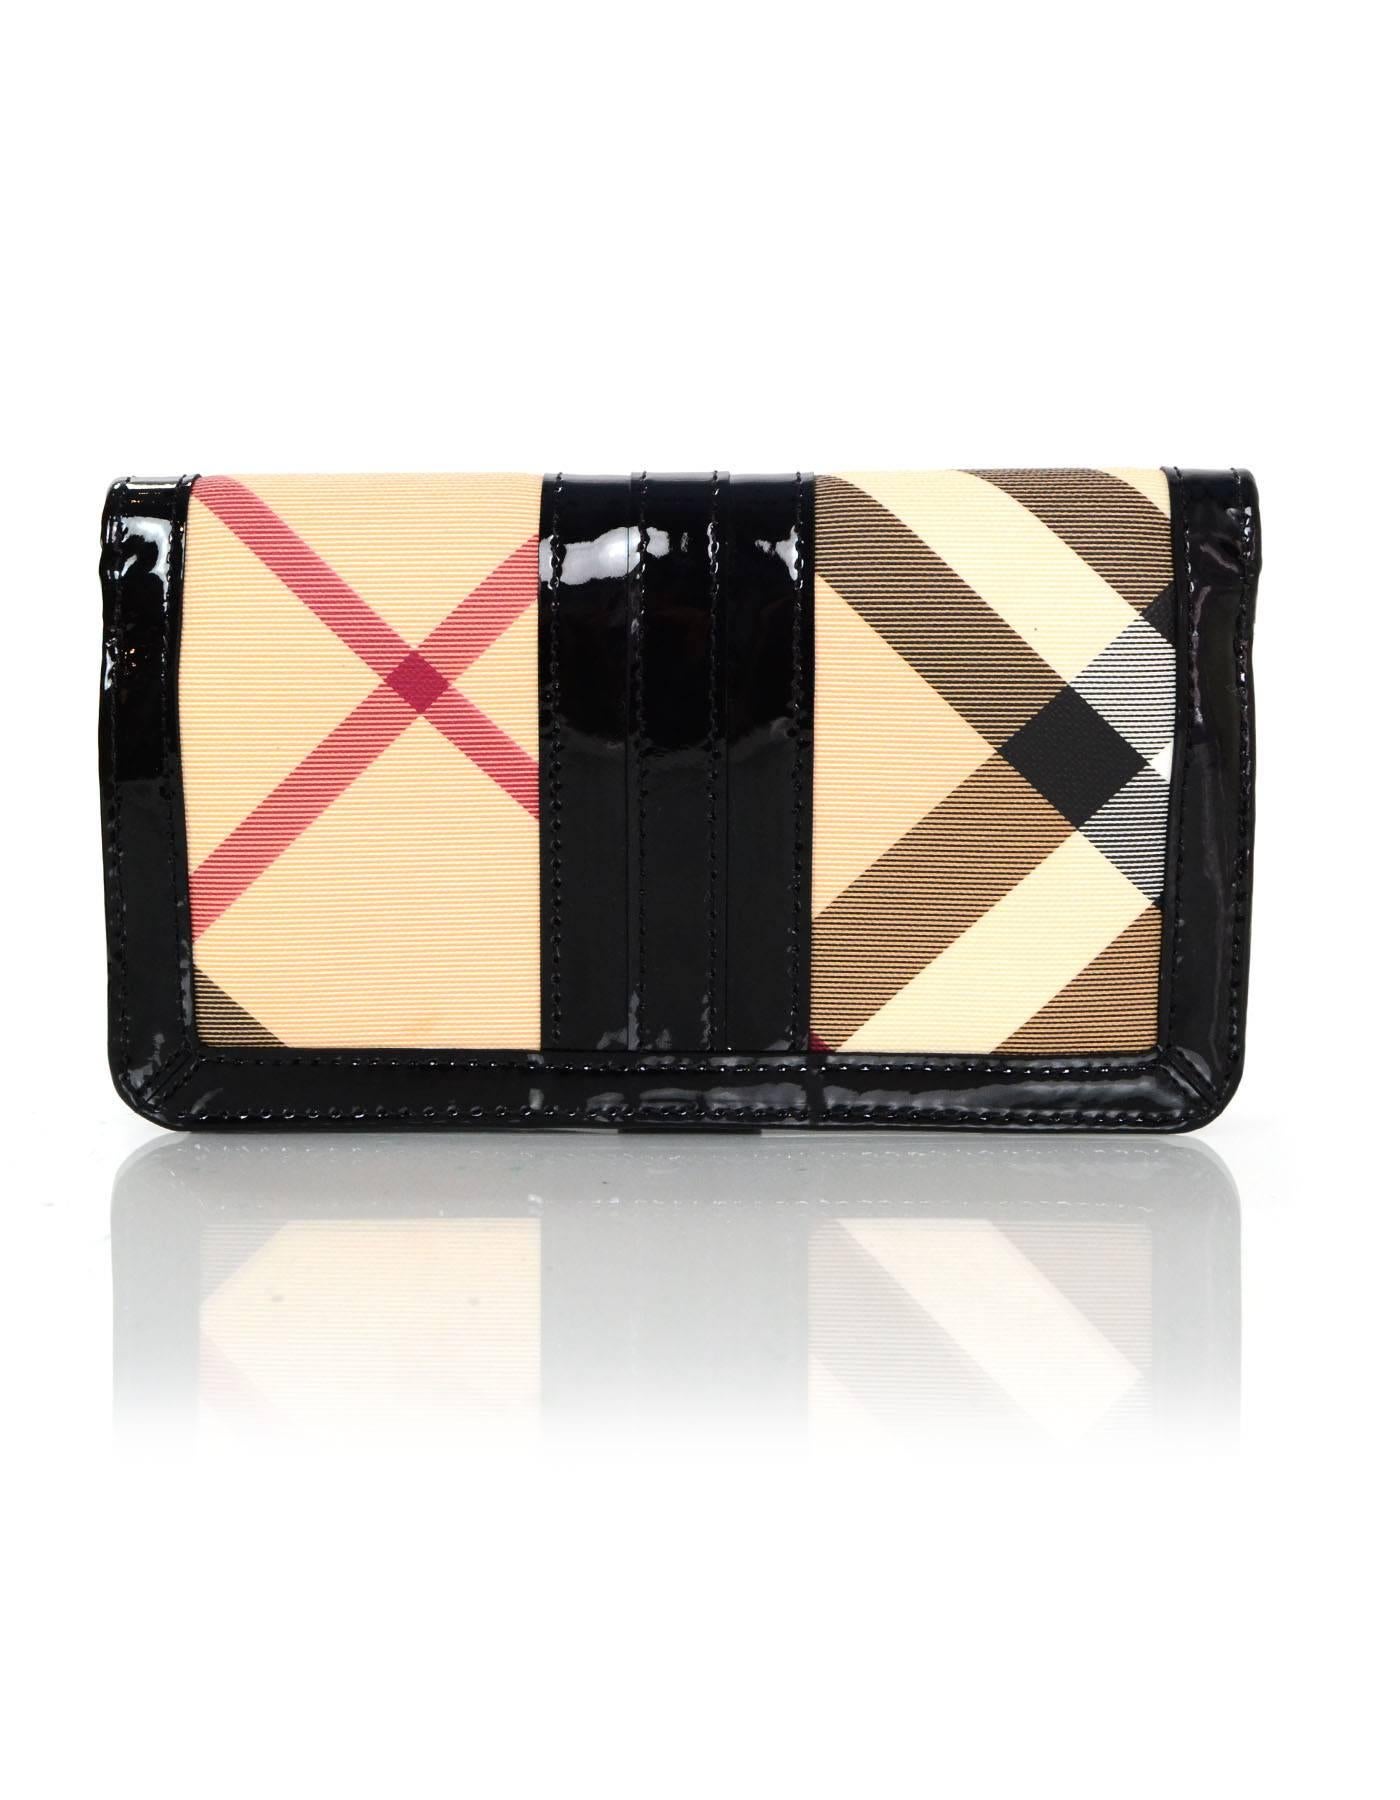 Burberry Black Patent Leather and Nova Plaid Wallet

Color: Black, tan
Materials: Patent leather, coated canvas
Lining: Black leather and tan textile
Closure/Opening: Front snap closure
Exterior Pockets: Exterior zip pouch
Interior Pockets: